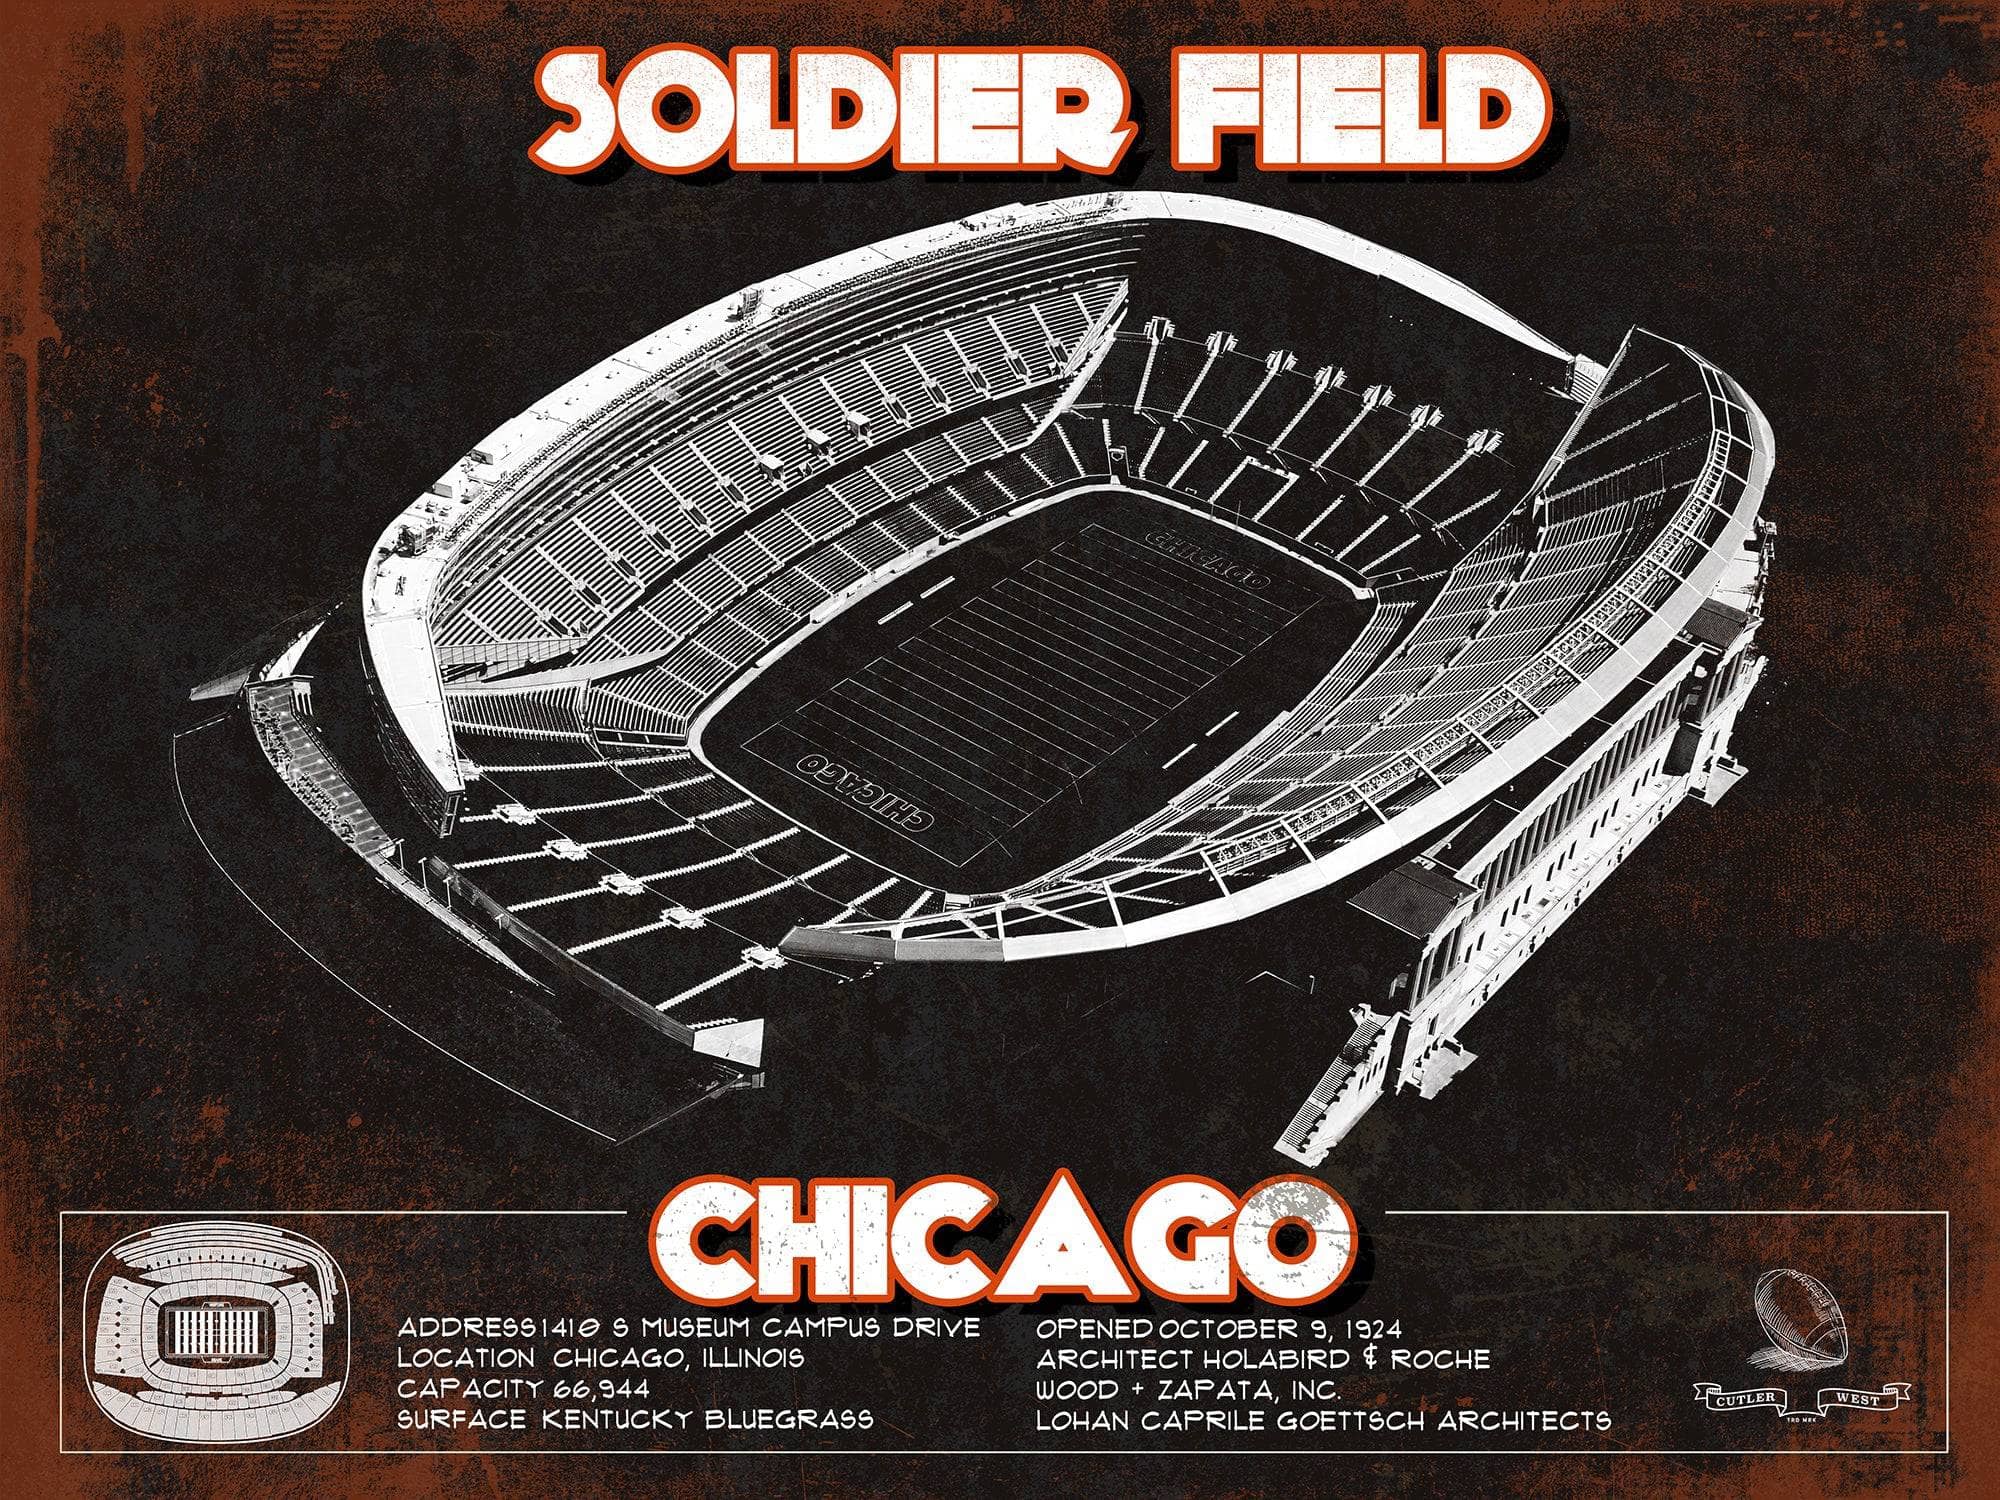 Cutler West Pro Football Collection 14" x 11" / Unframed Chicago Bears Stadium Seating Chart Soldier Field Vintage Football Print 933350144_31908